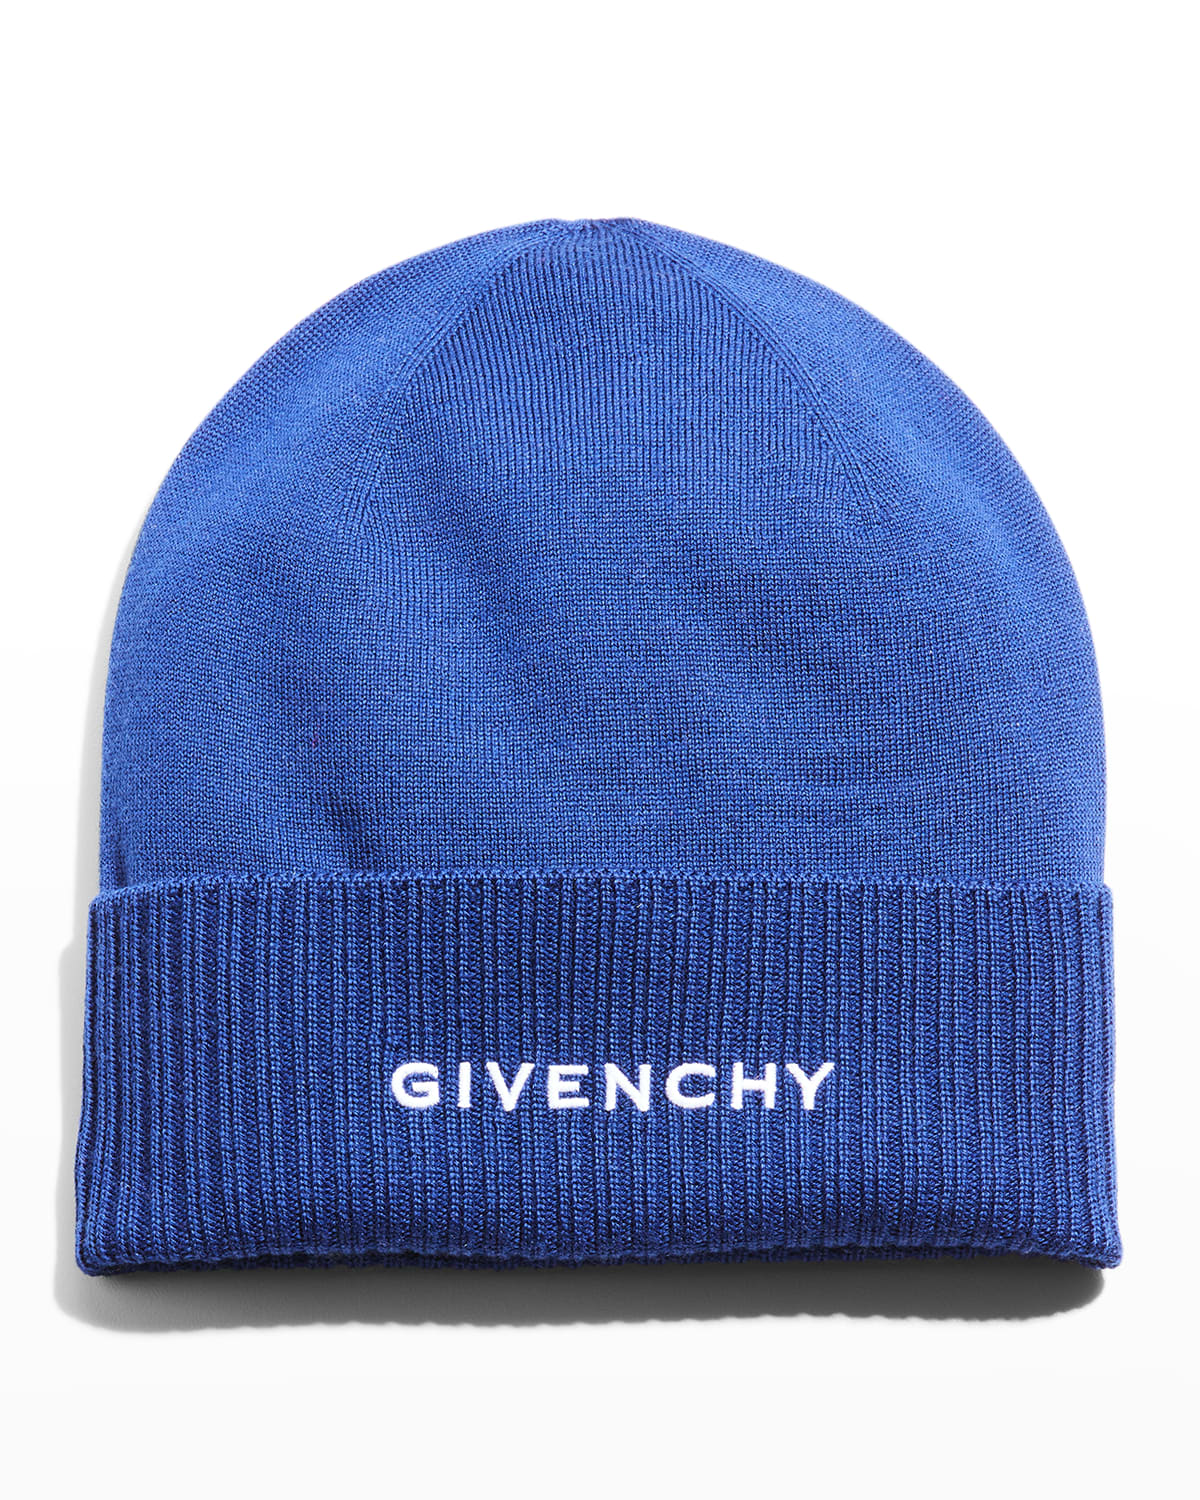 GIVENCHY MEN'S EMBROIDERED LOGO WOOL BEANIE HAT